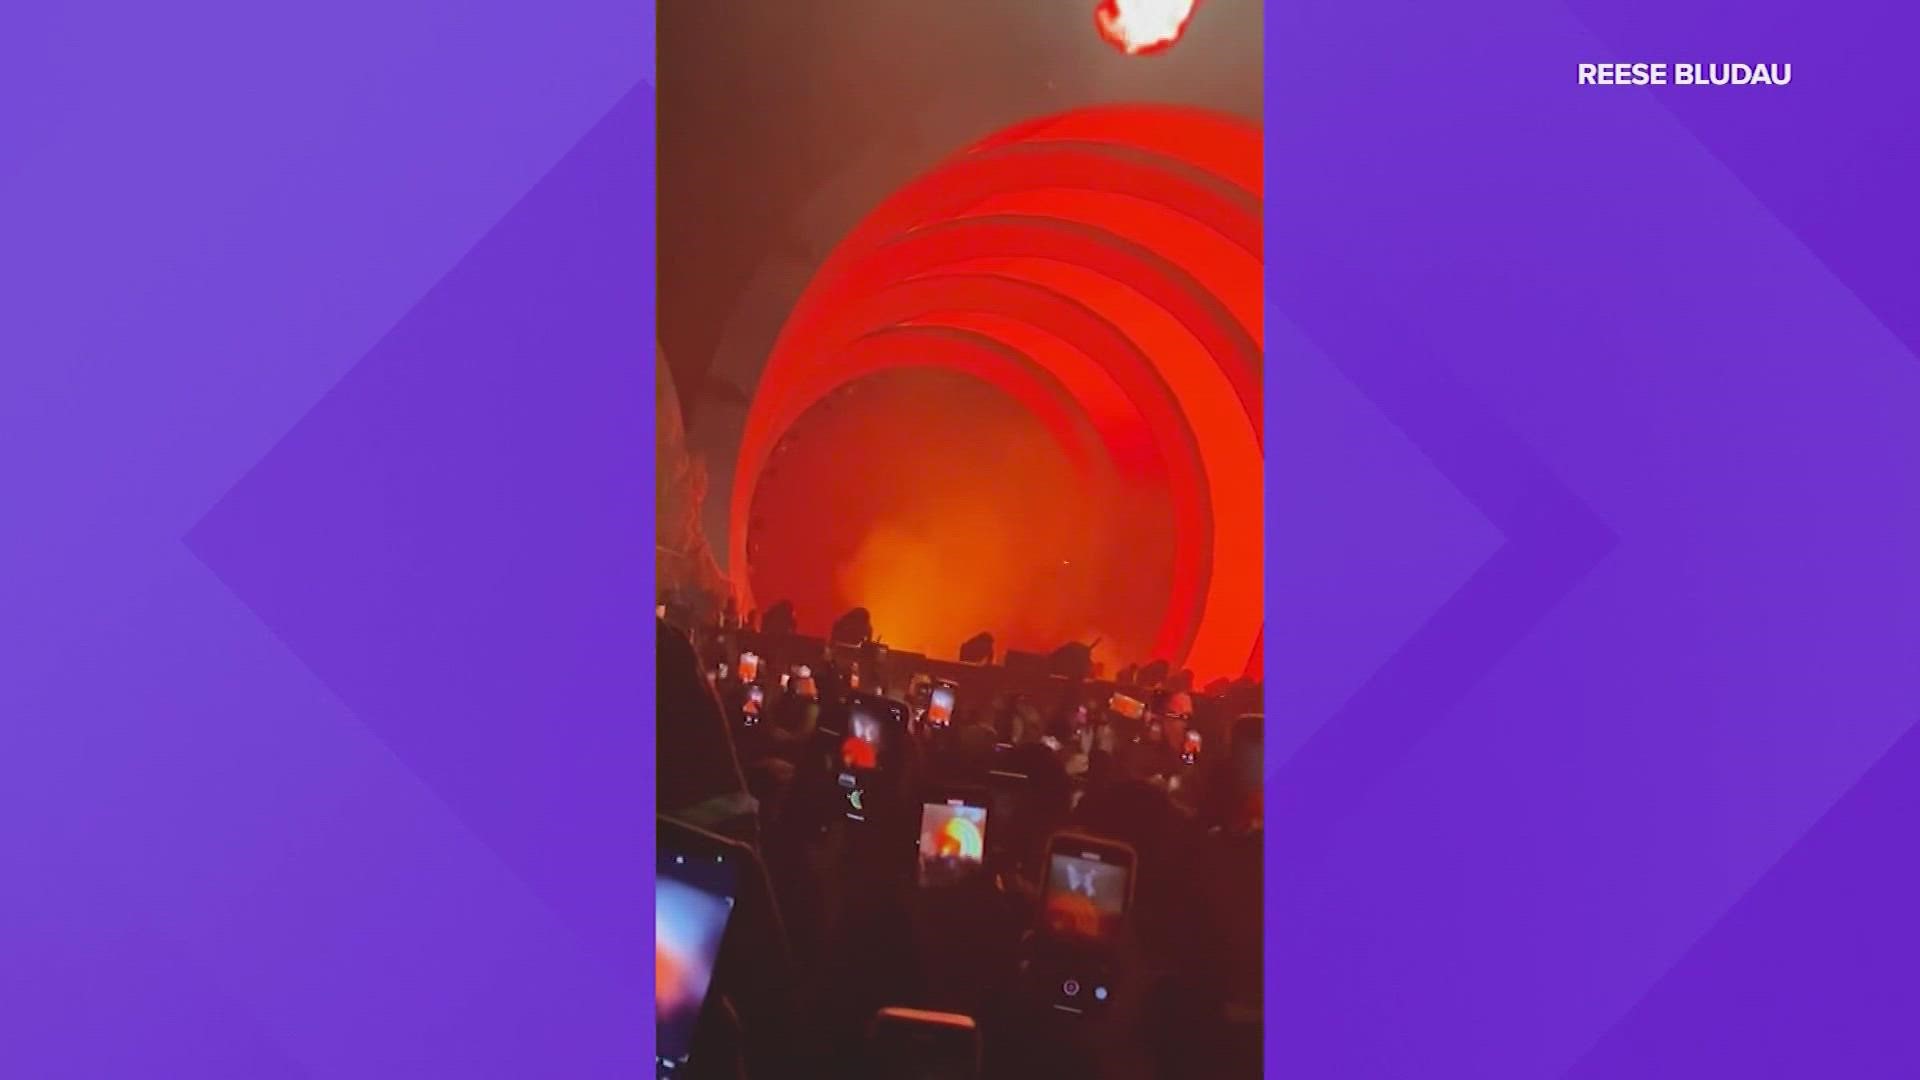 It was Reese Bludau's first music festival and it ended in tragedy when eight people died during Travis Scott's performance.